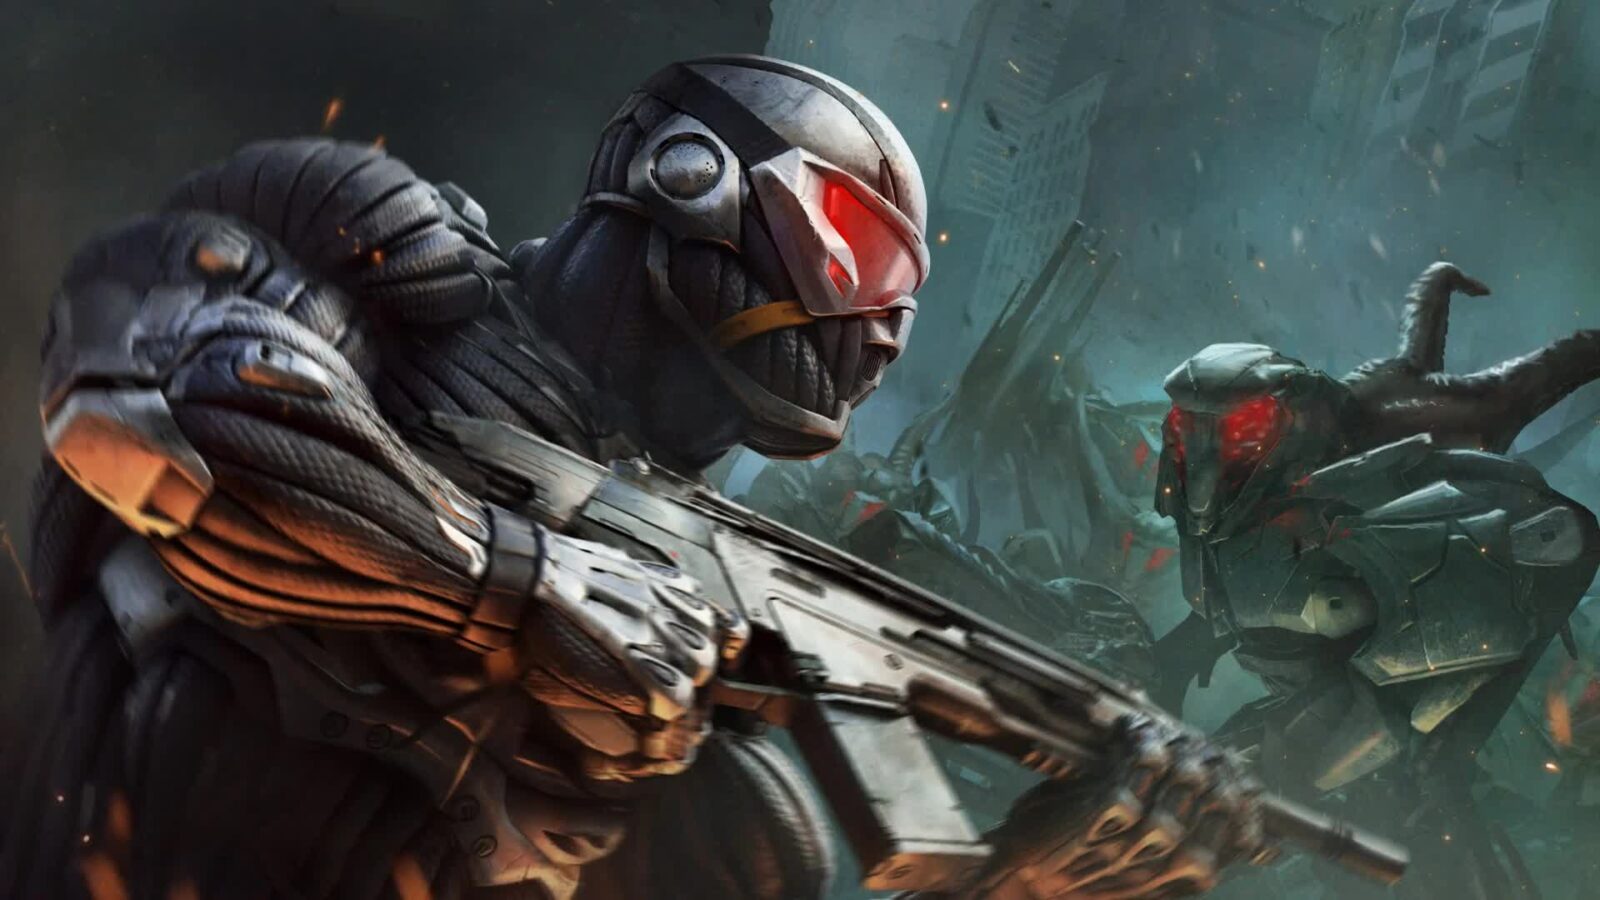 LiveWallpapers4Free.com | Crysis 3 Explosion Waves - Free Live Wallpaper